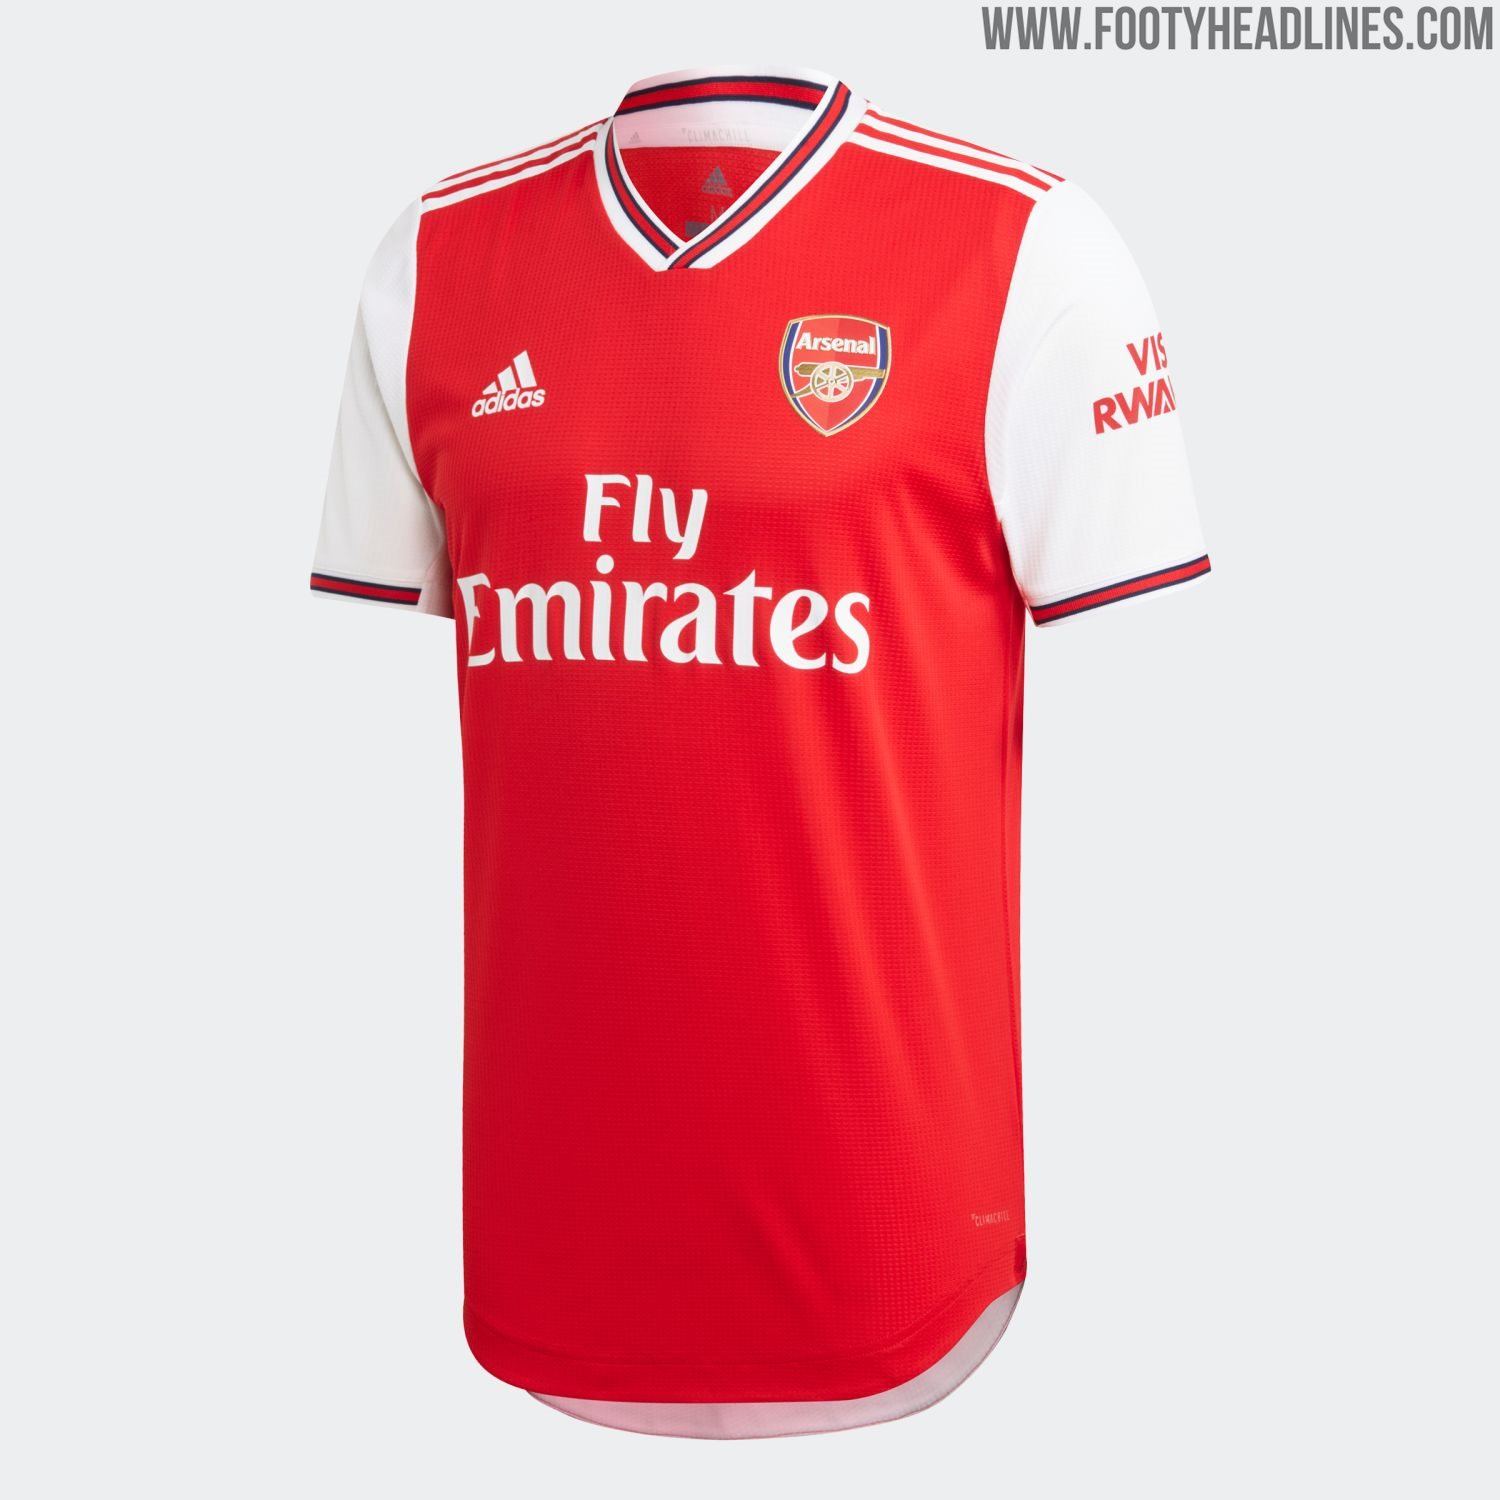 Arsenal FC Two Pack Body Suit 2019-20